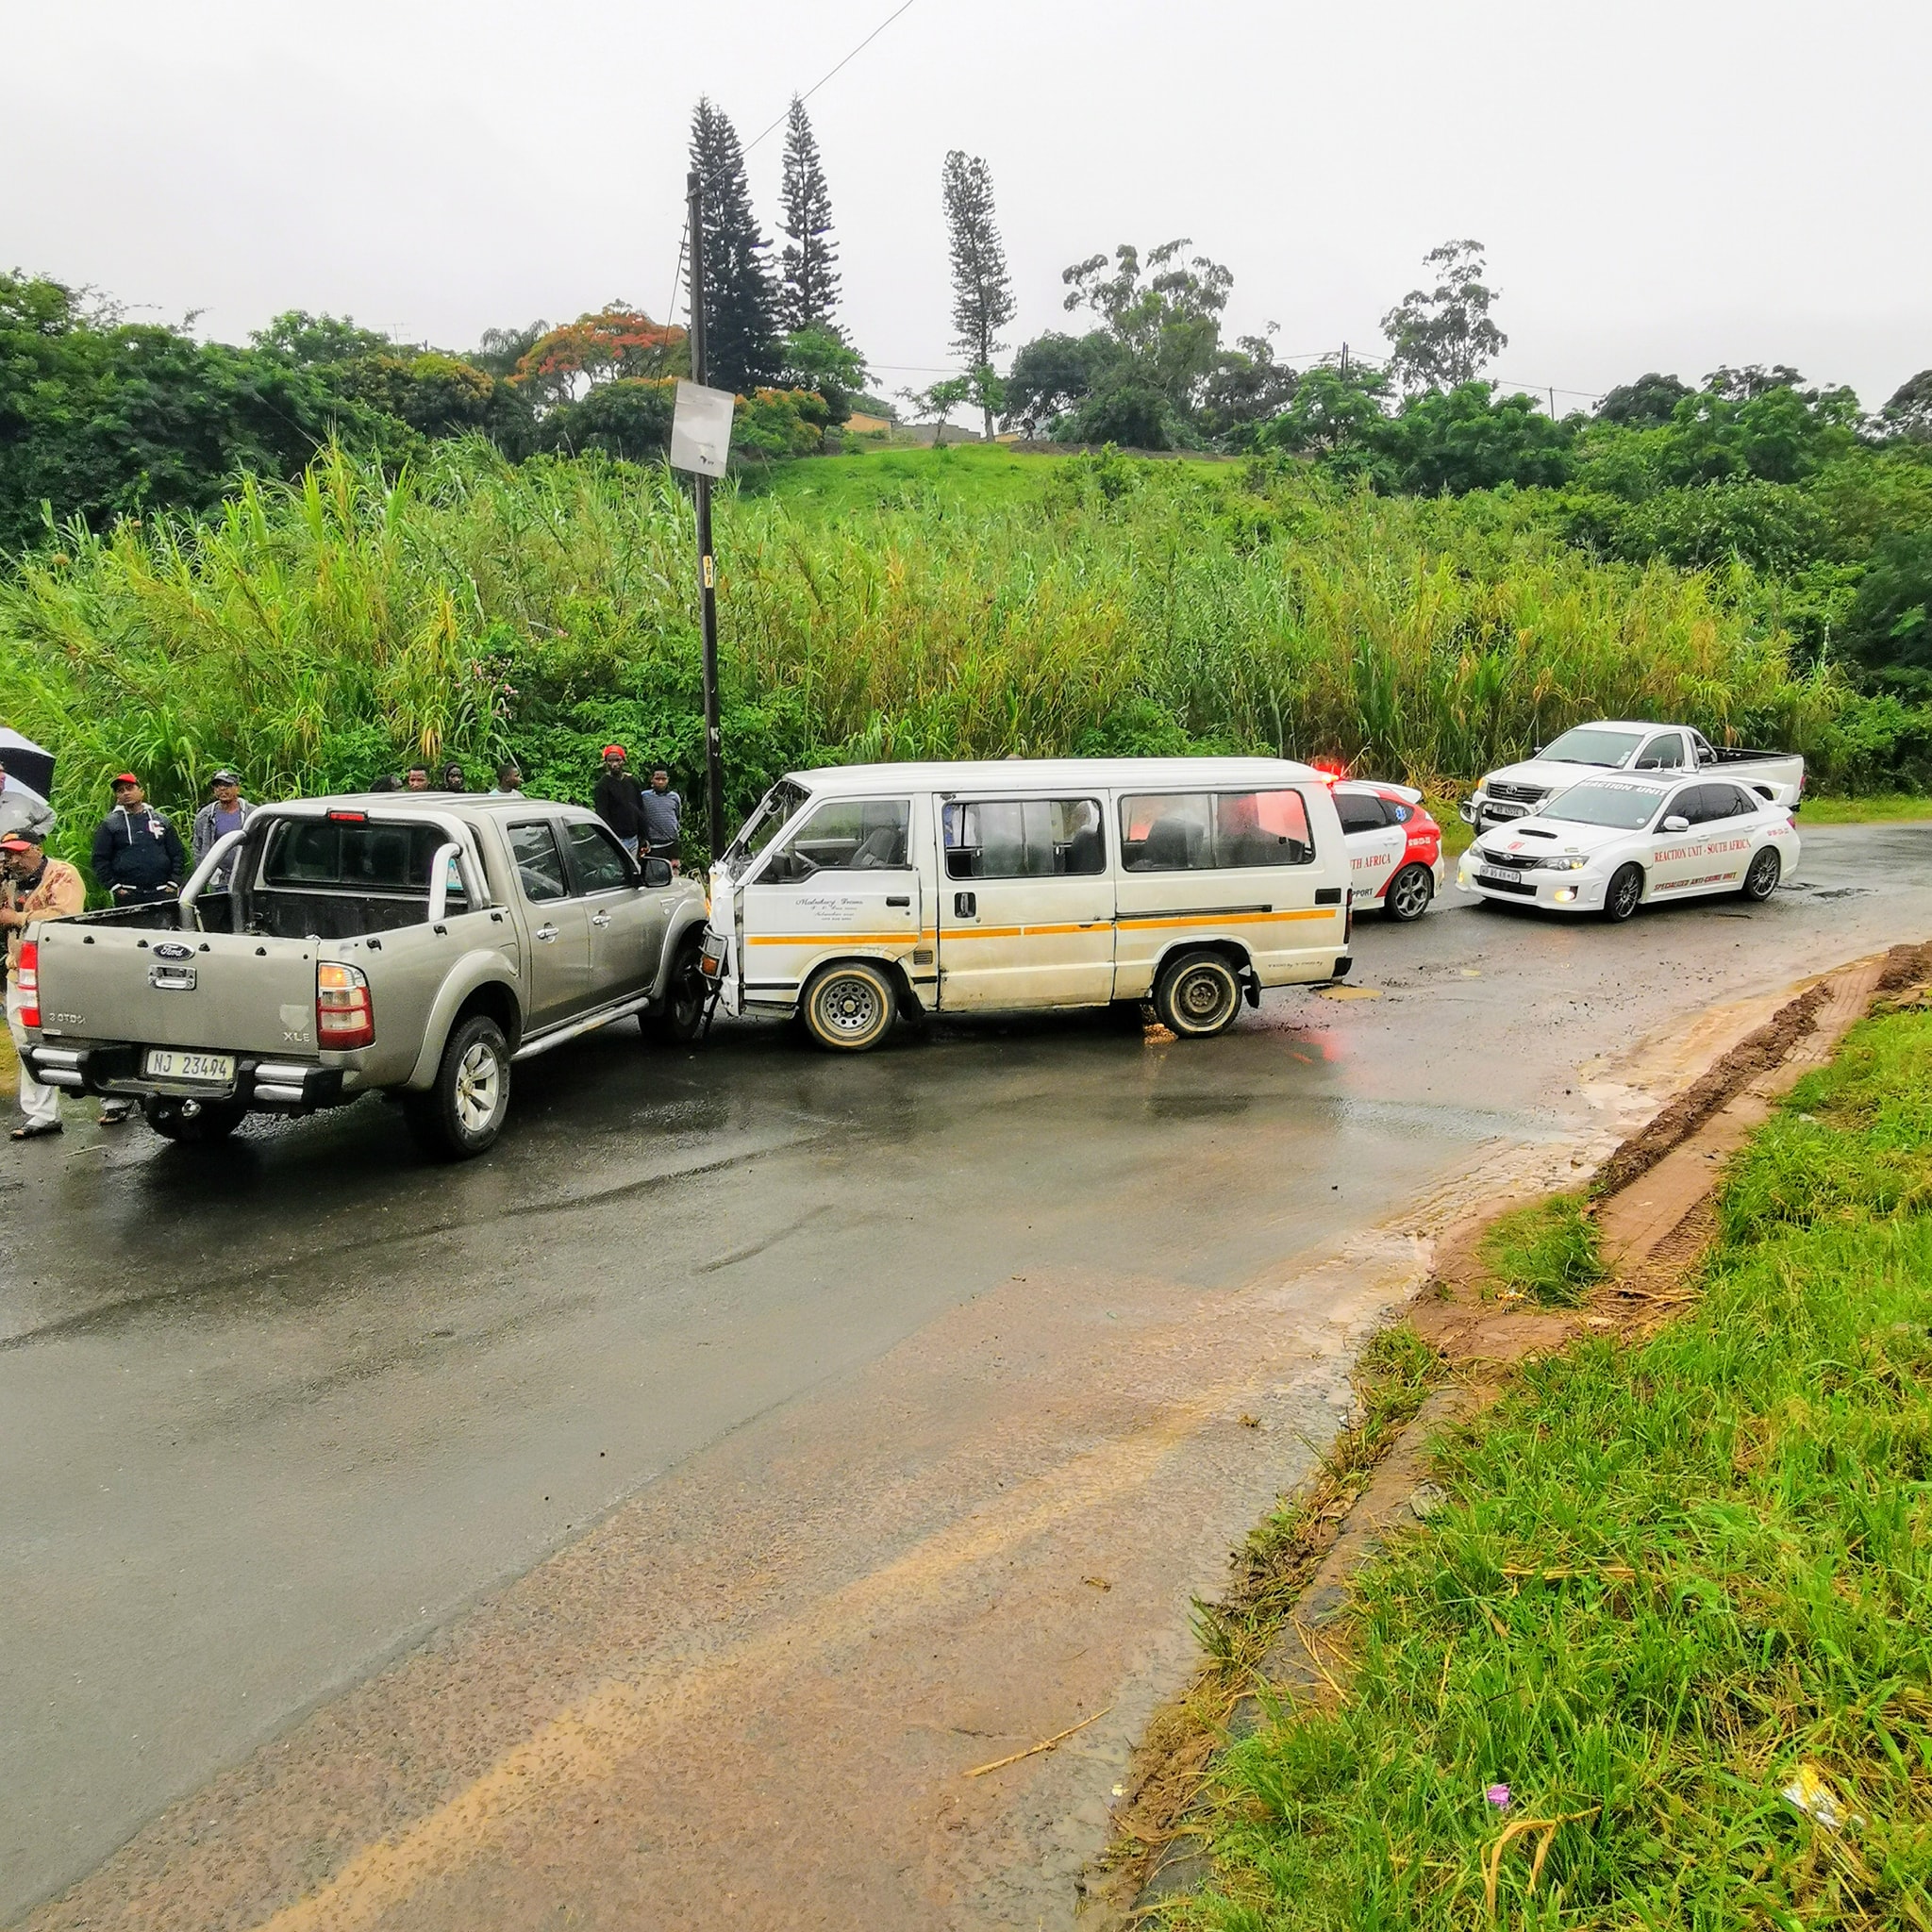 Overtaking Taxi Crashes Into Bakkie in Redcliffe, KZN